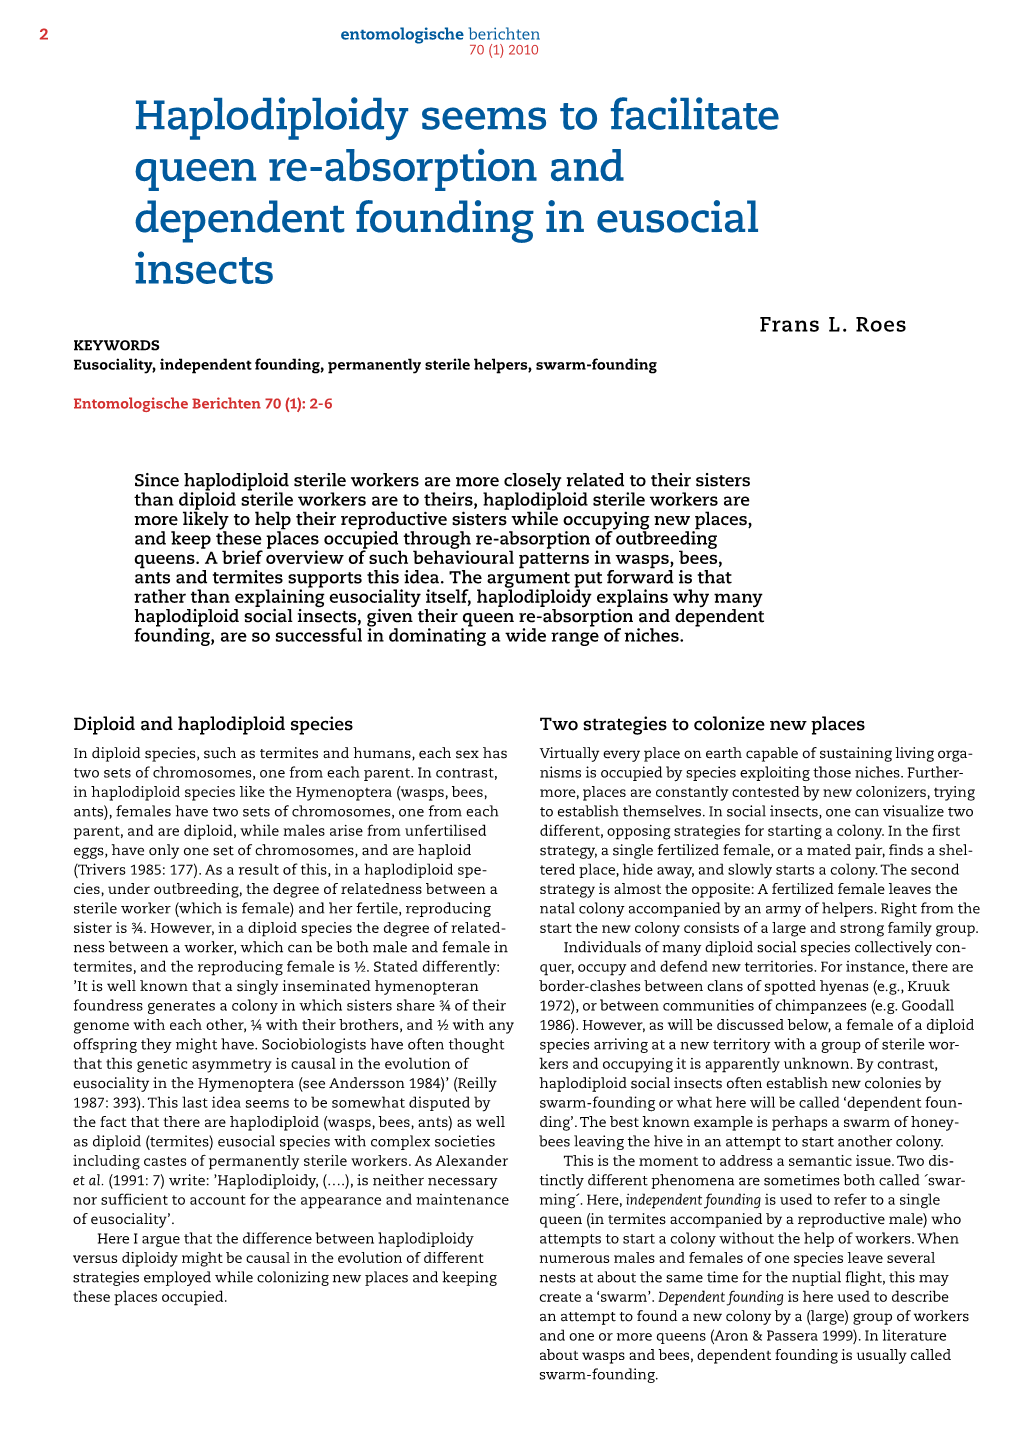 Haplodiploidy Seems to Facilitate Queen Re-Absorption and Dependent Founding in Eusocial Insects